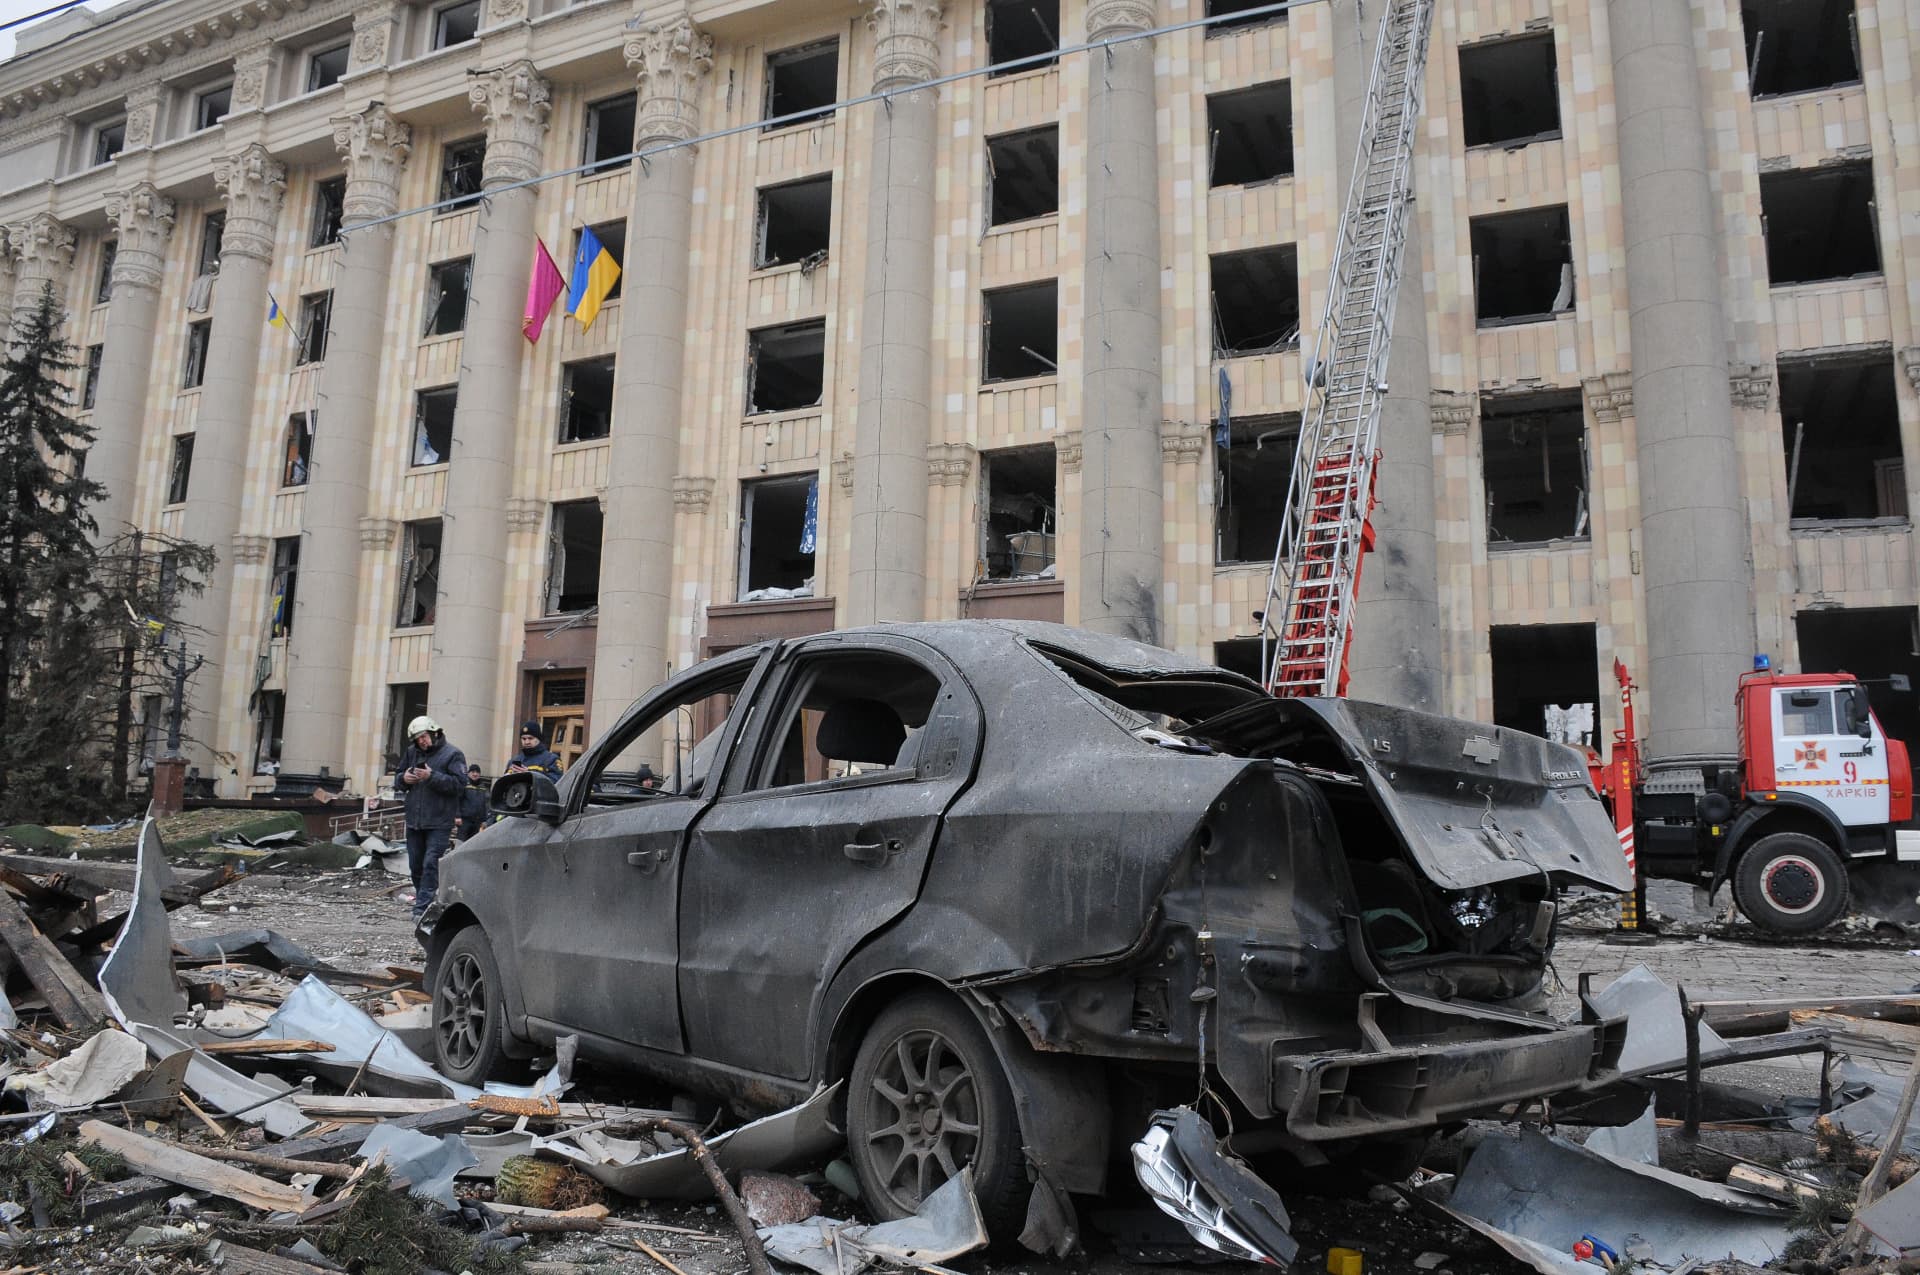 Kharkiv Regional State Administration after rocket attacks by Russian occupying military